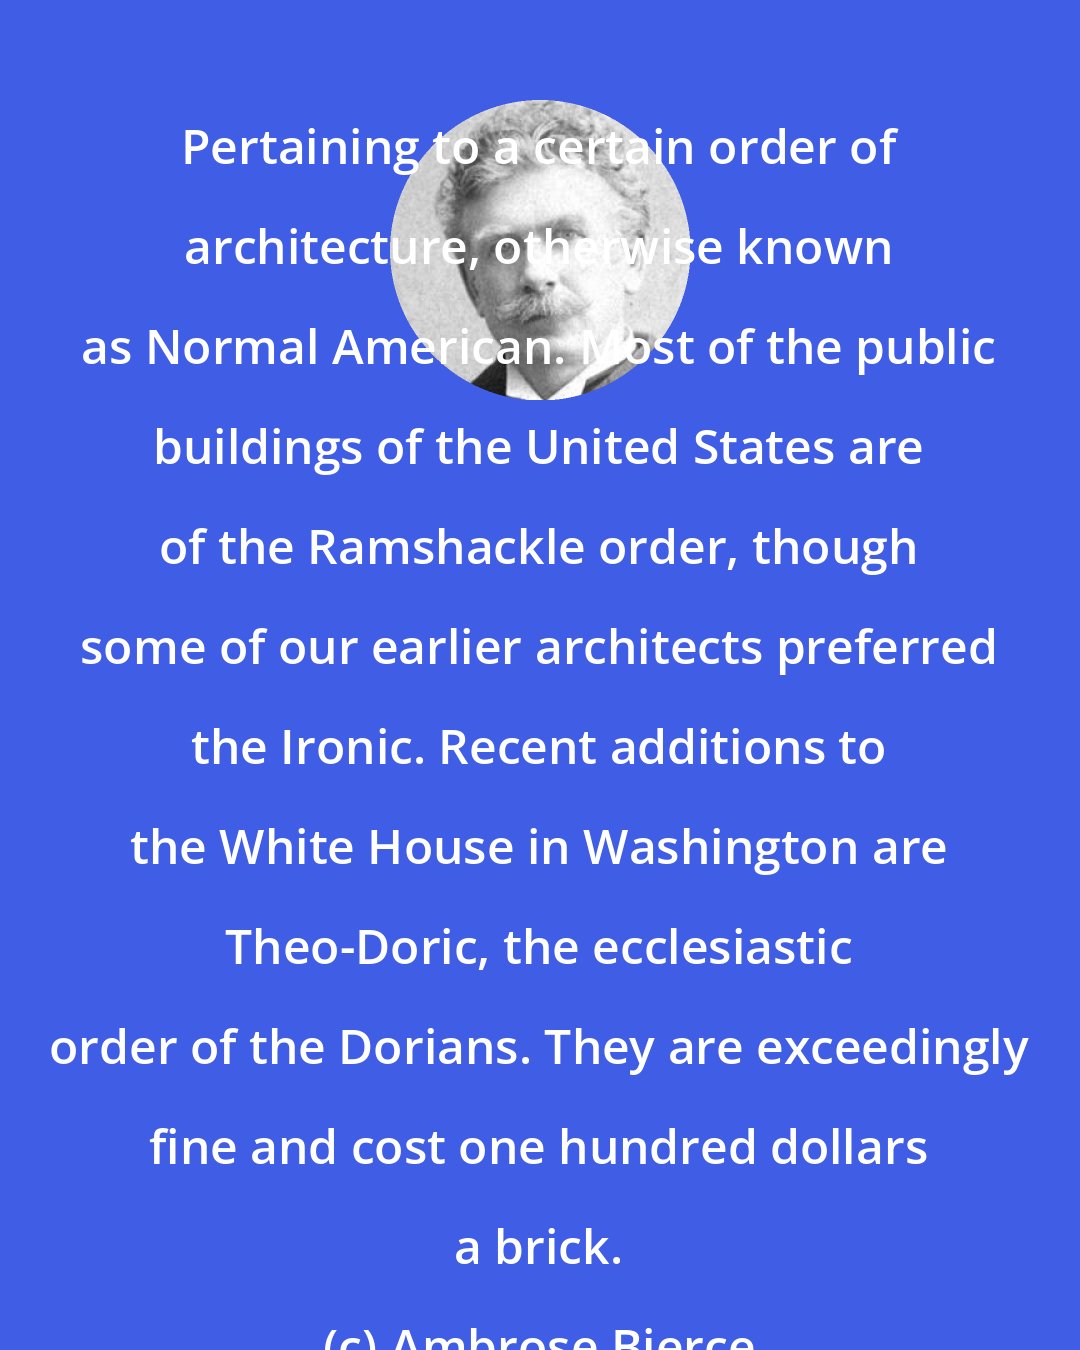 Ambrose Bierce: Pertaining to a certain order of architecture, otherwise known as Normal American. Most of the public buildings of the United States are of the Ramshackle order, though some of our earlier architects preferred the Ironic. Recent additions to the White House in Washington are Theo-Doric, the ecclesiastic order of the Dorians. They are exceedingly fine and cost one hundred dollars a brick.